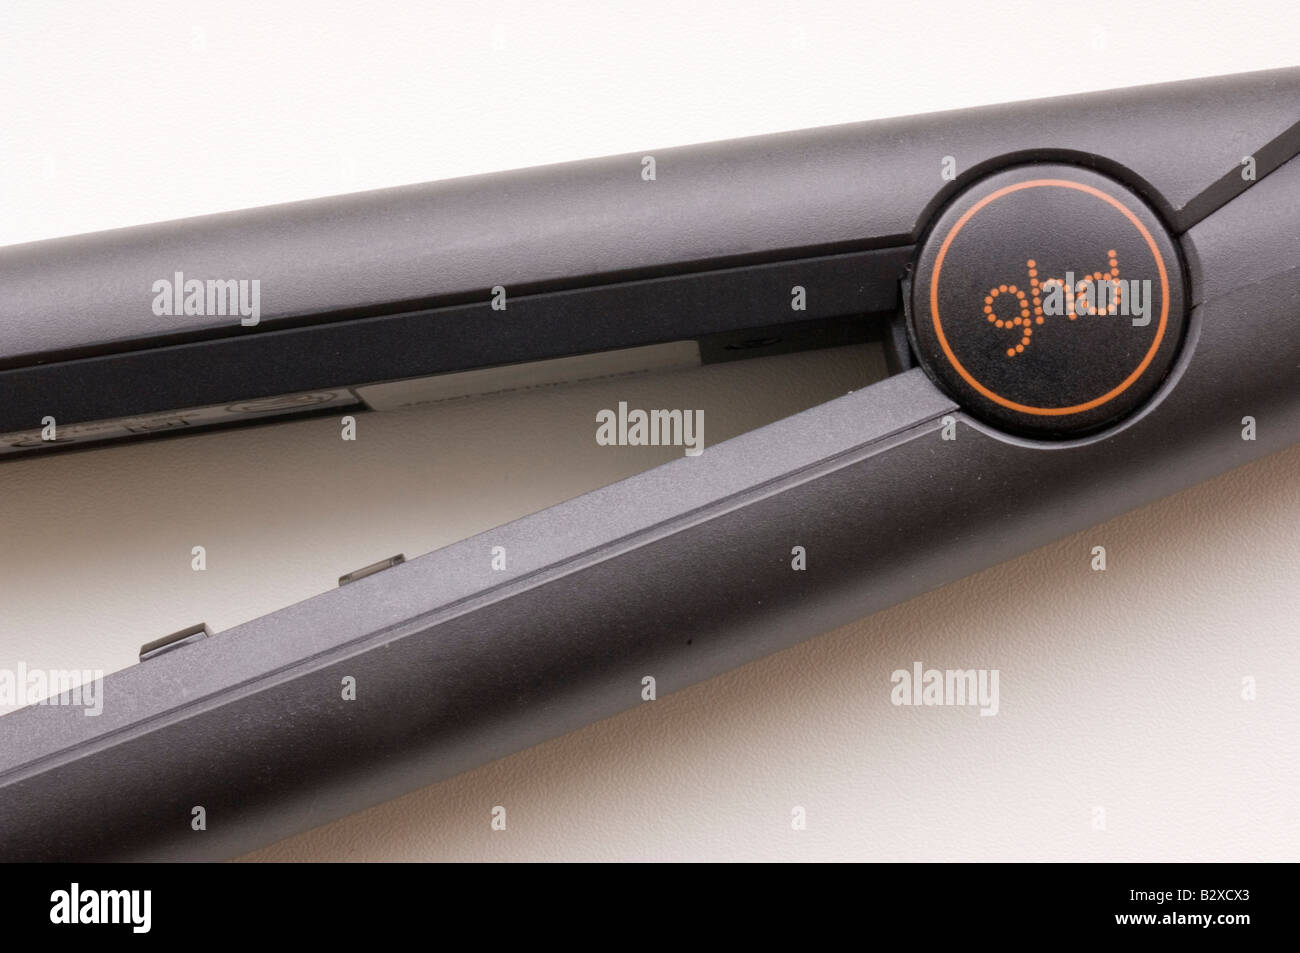 A pair of Ghd professional hair straightening irons for straightening hair Stock Photo